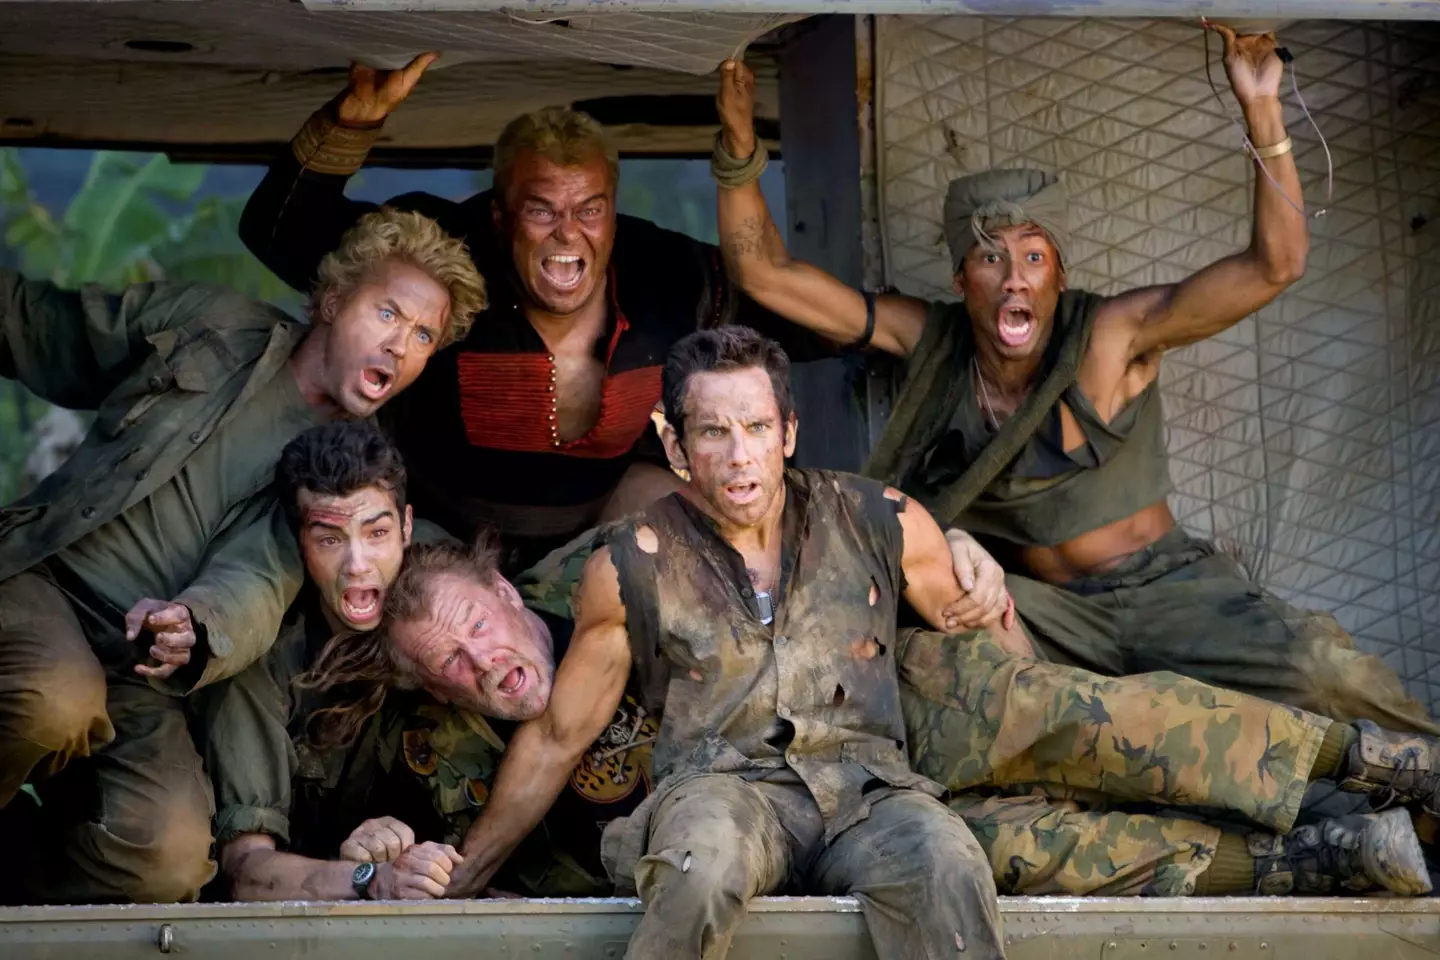 Tropic Thunder premiered back in 2008.